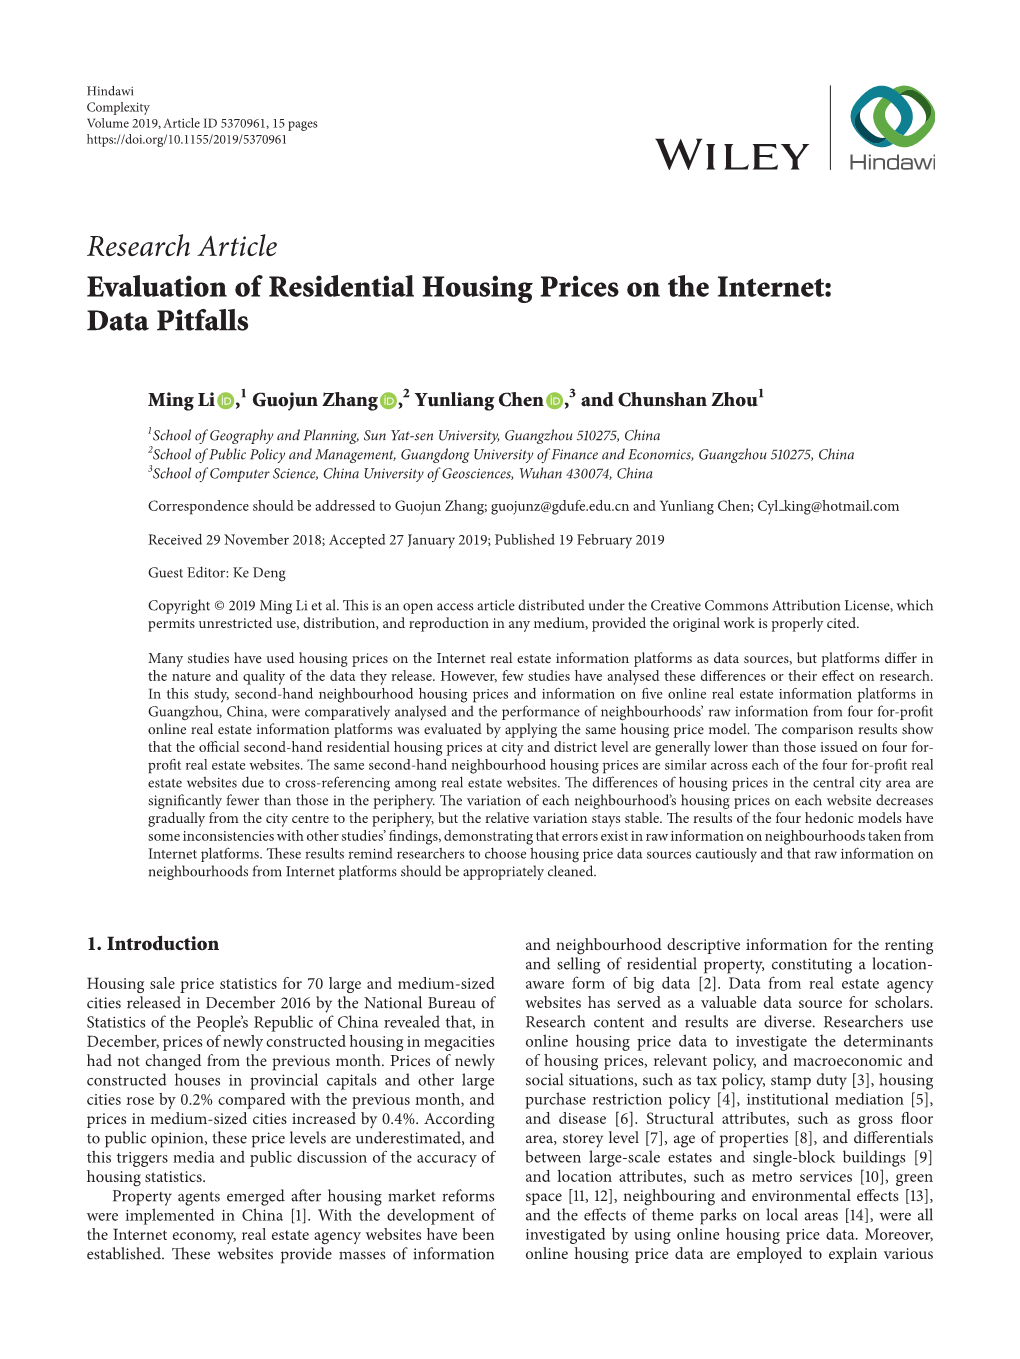 Research Article Evaluation of Residential Housing Prices on the Internet: Data Pitfalls